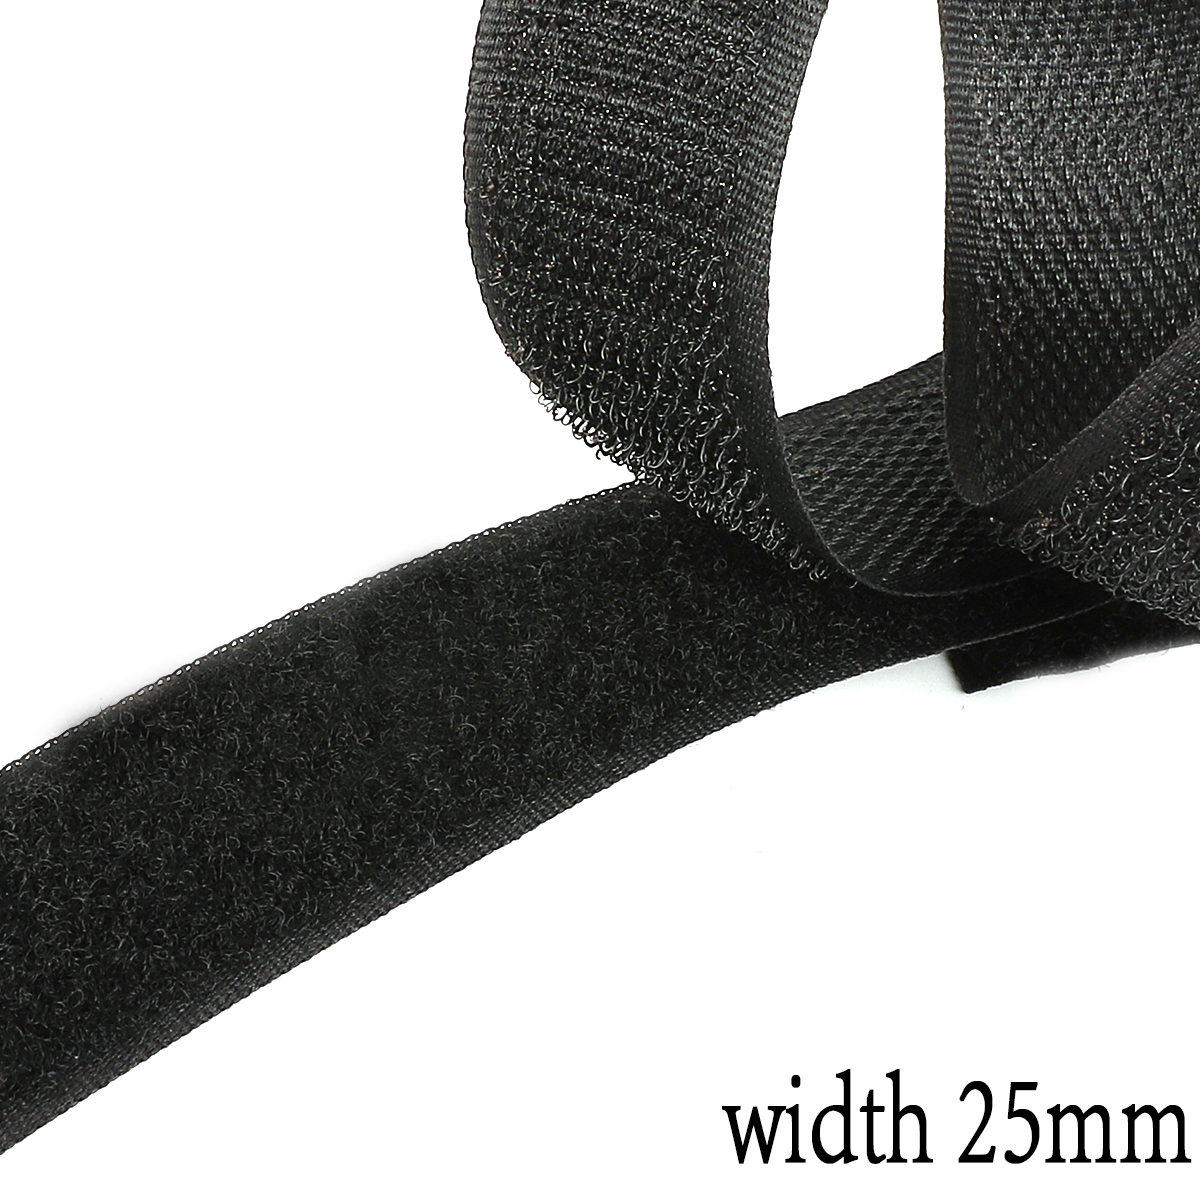 2M 16-40mm Black Not Adhesive Hook and Loop Fastener Tape Sticker Velcros Nylon Magic Tape for DIY Craft Supply Roll Sew On Tape: Black 25mm width